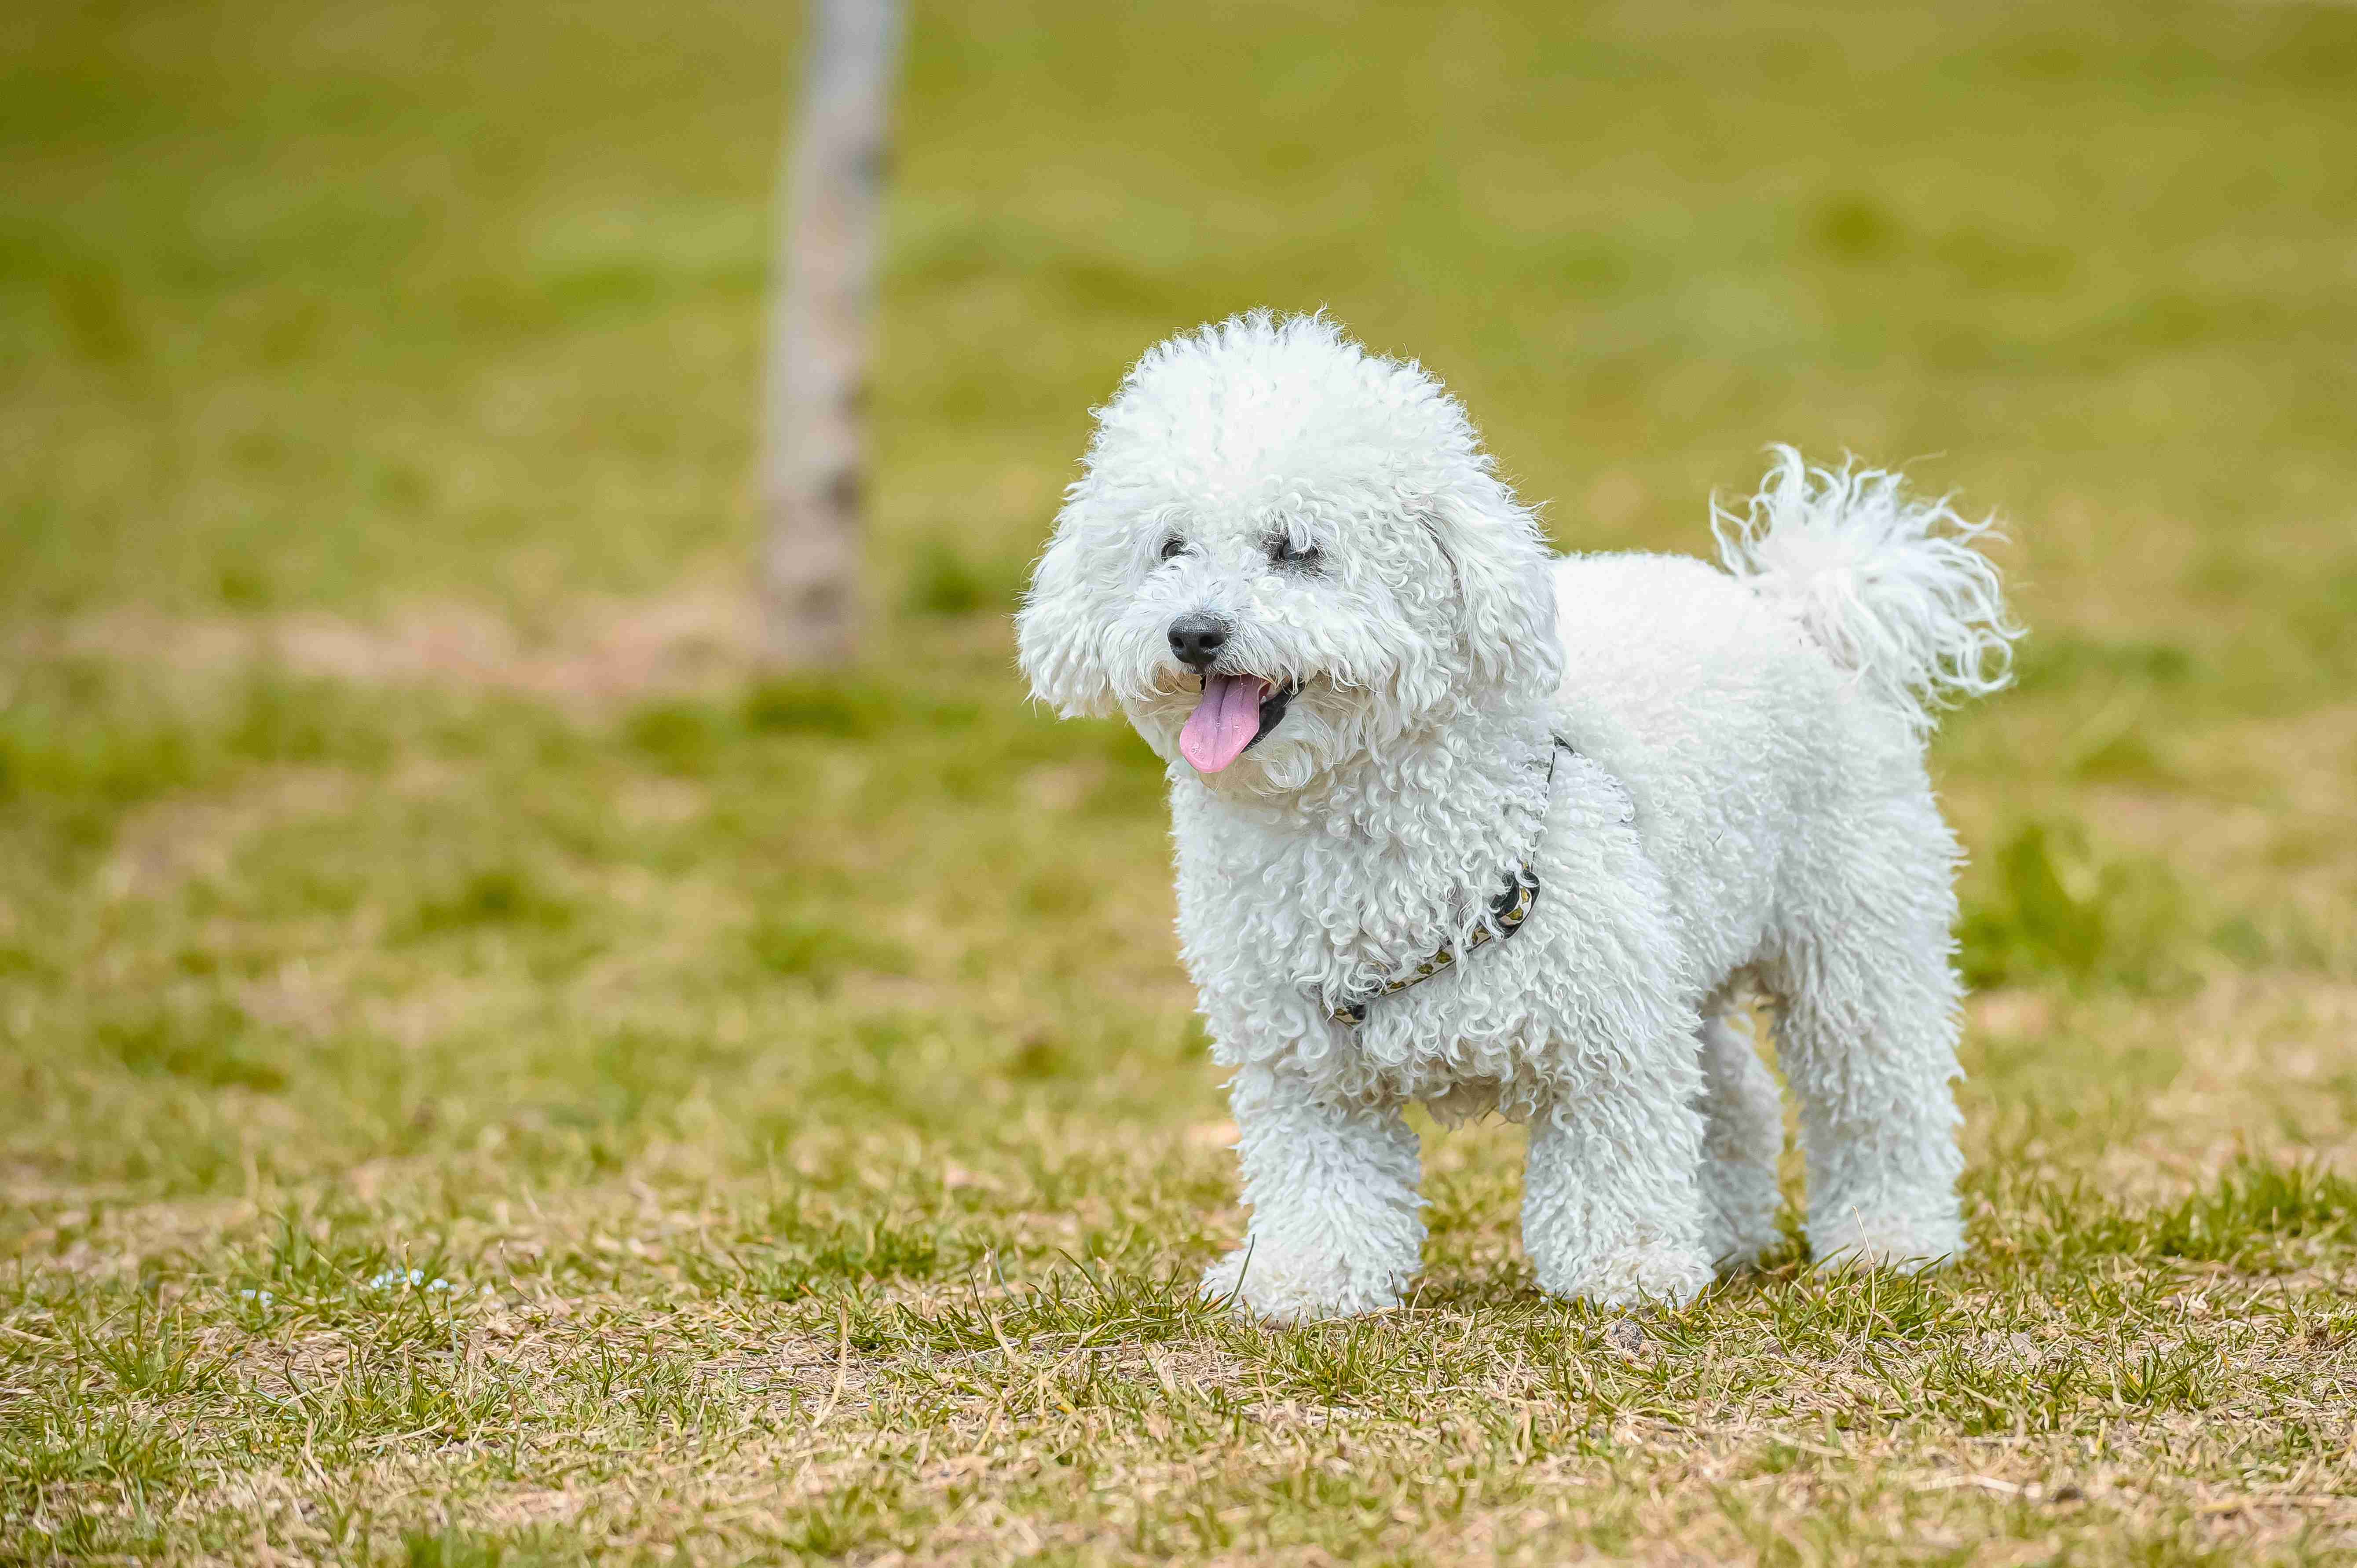 What are some common eye problems that Poodles may experience, and how can they be treated?